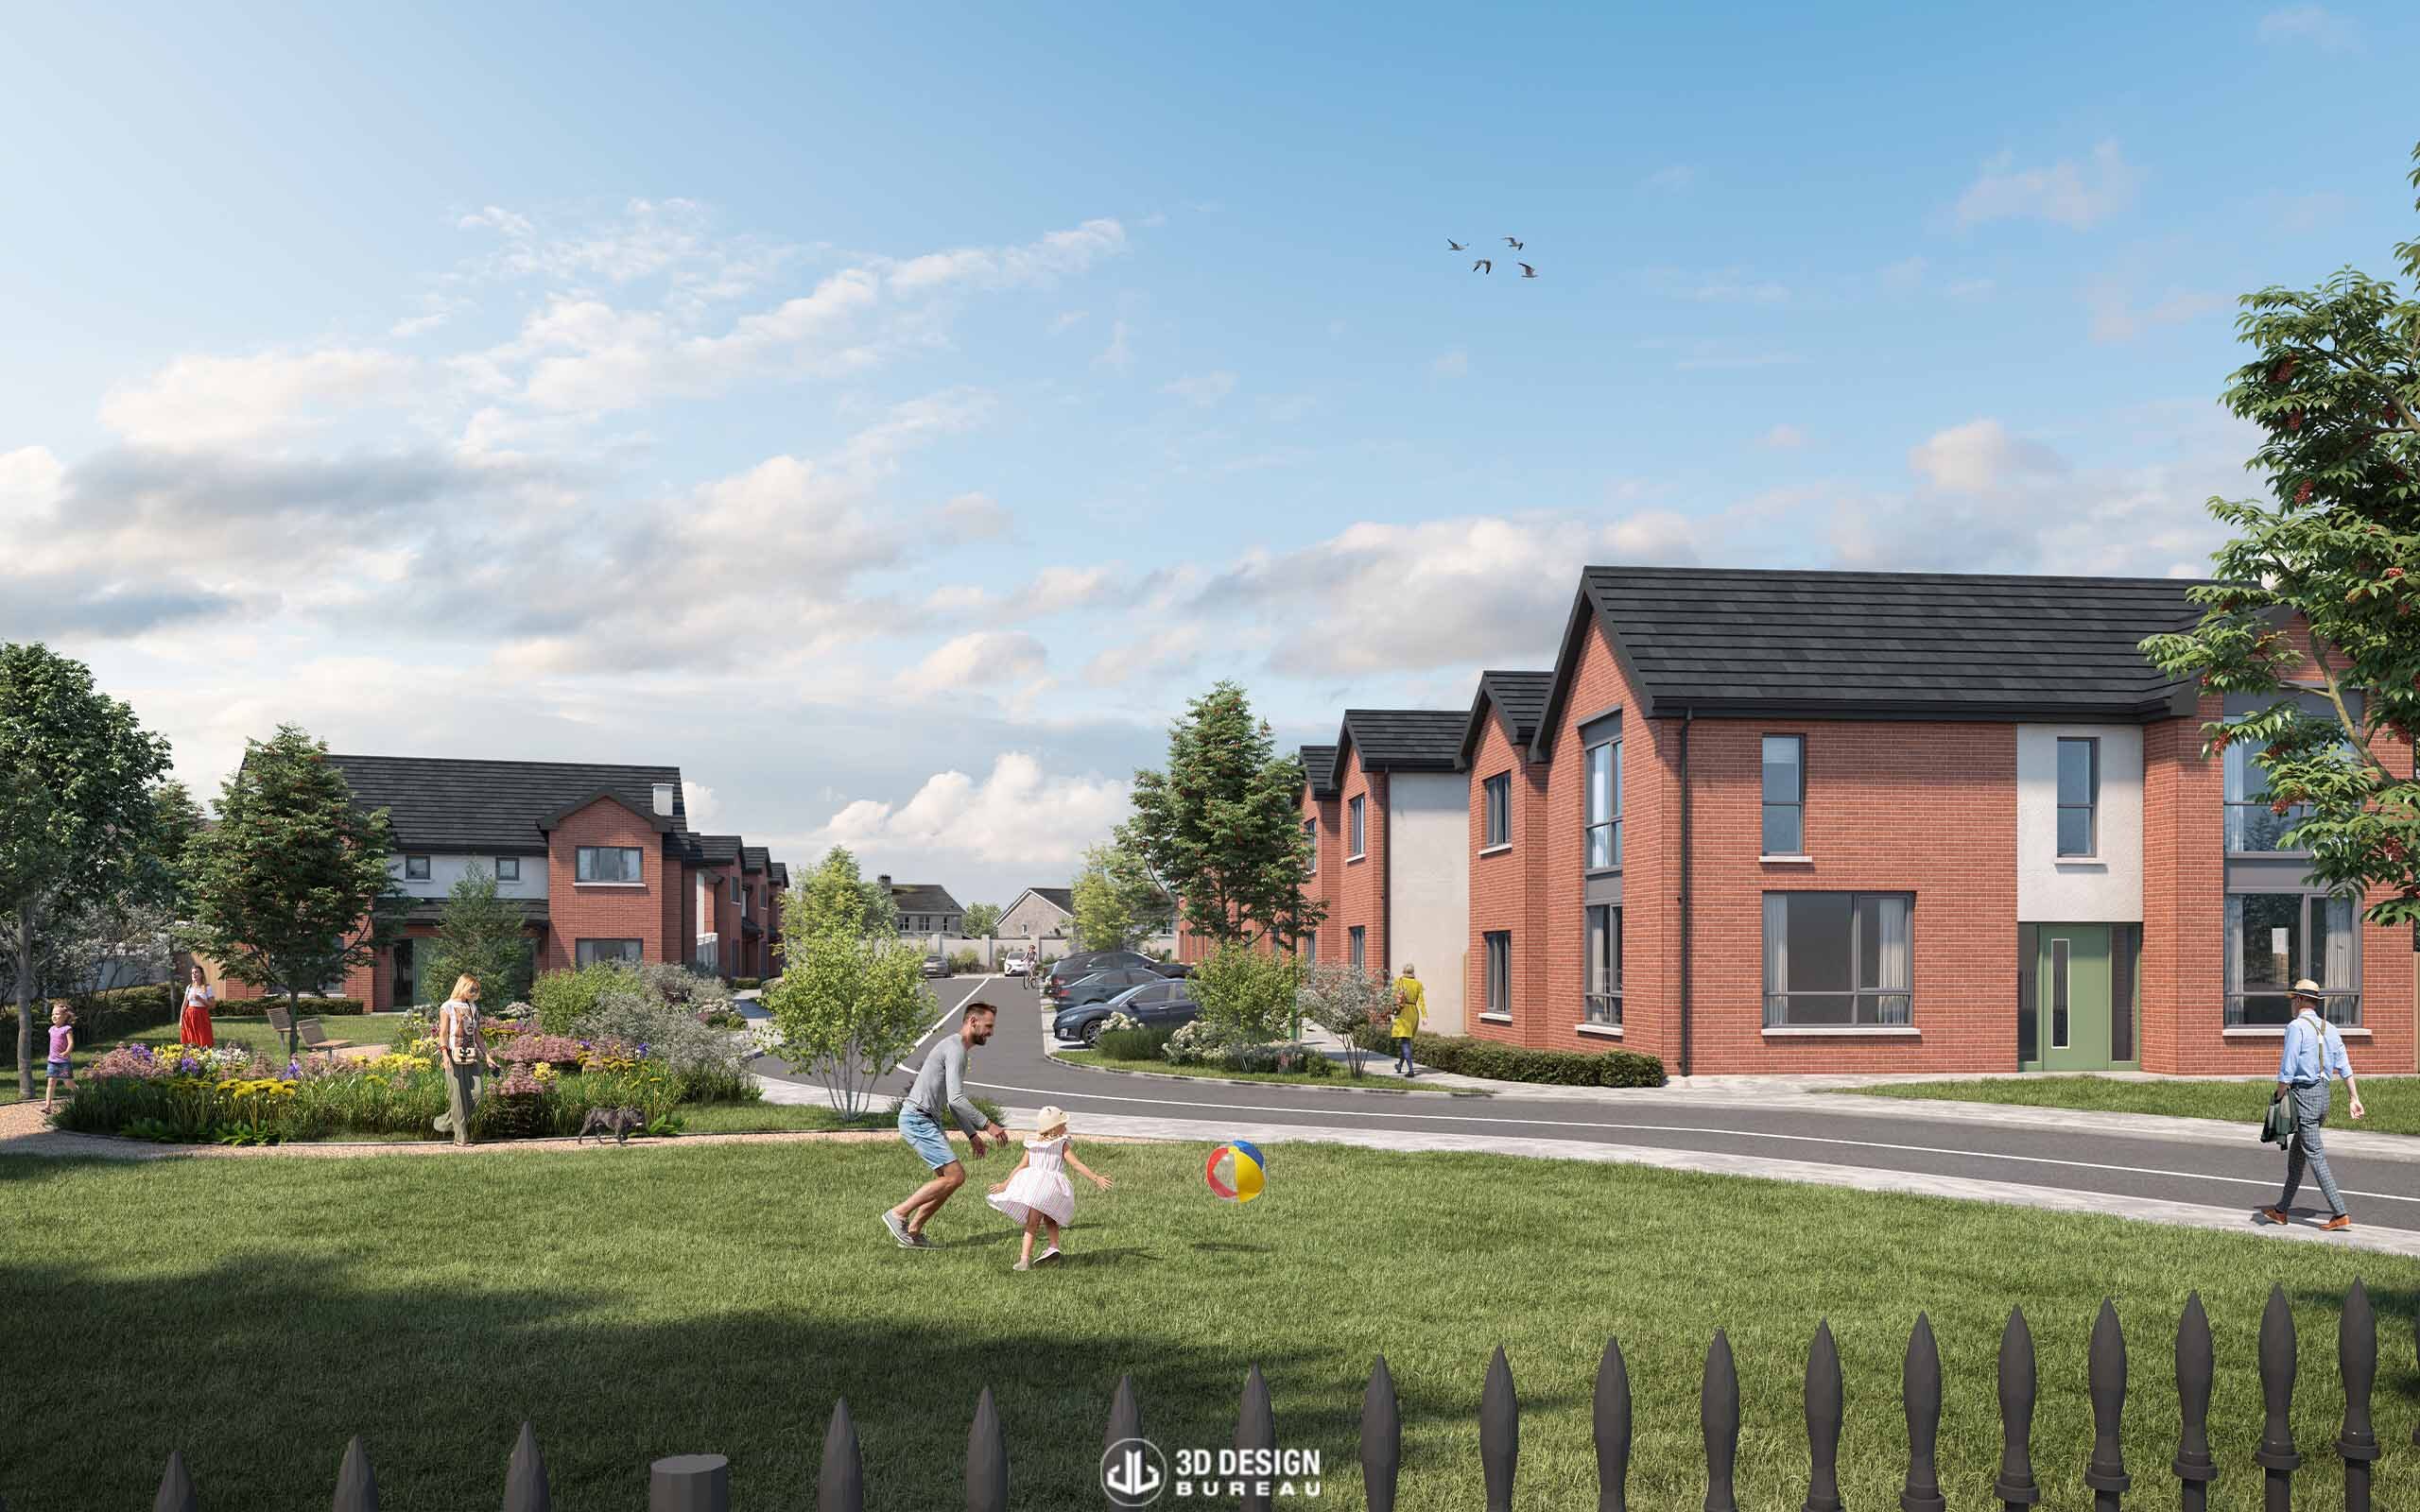 Architectural computer generated images of the approved development in Mullingar